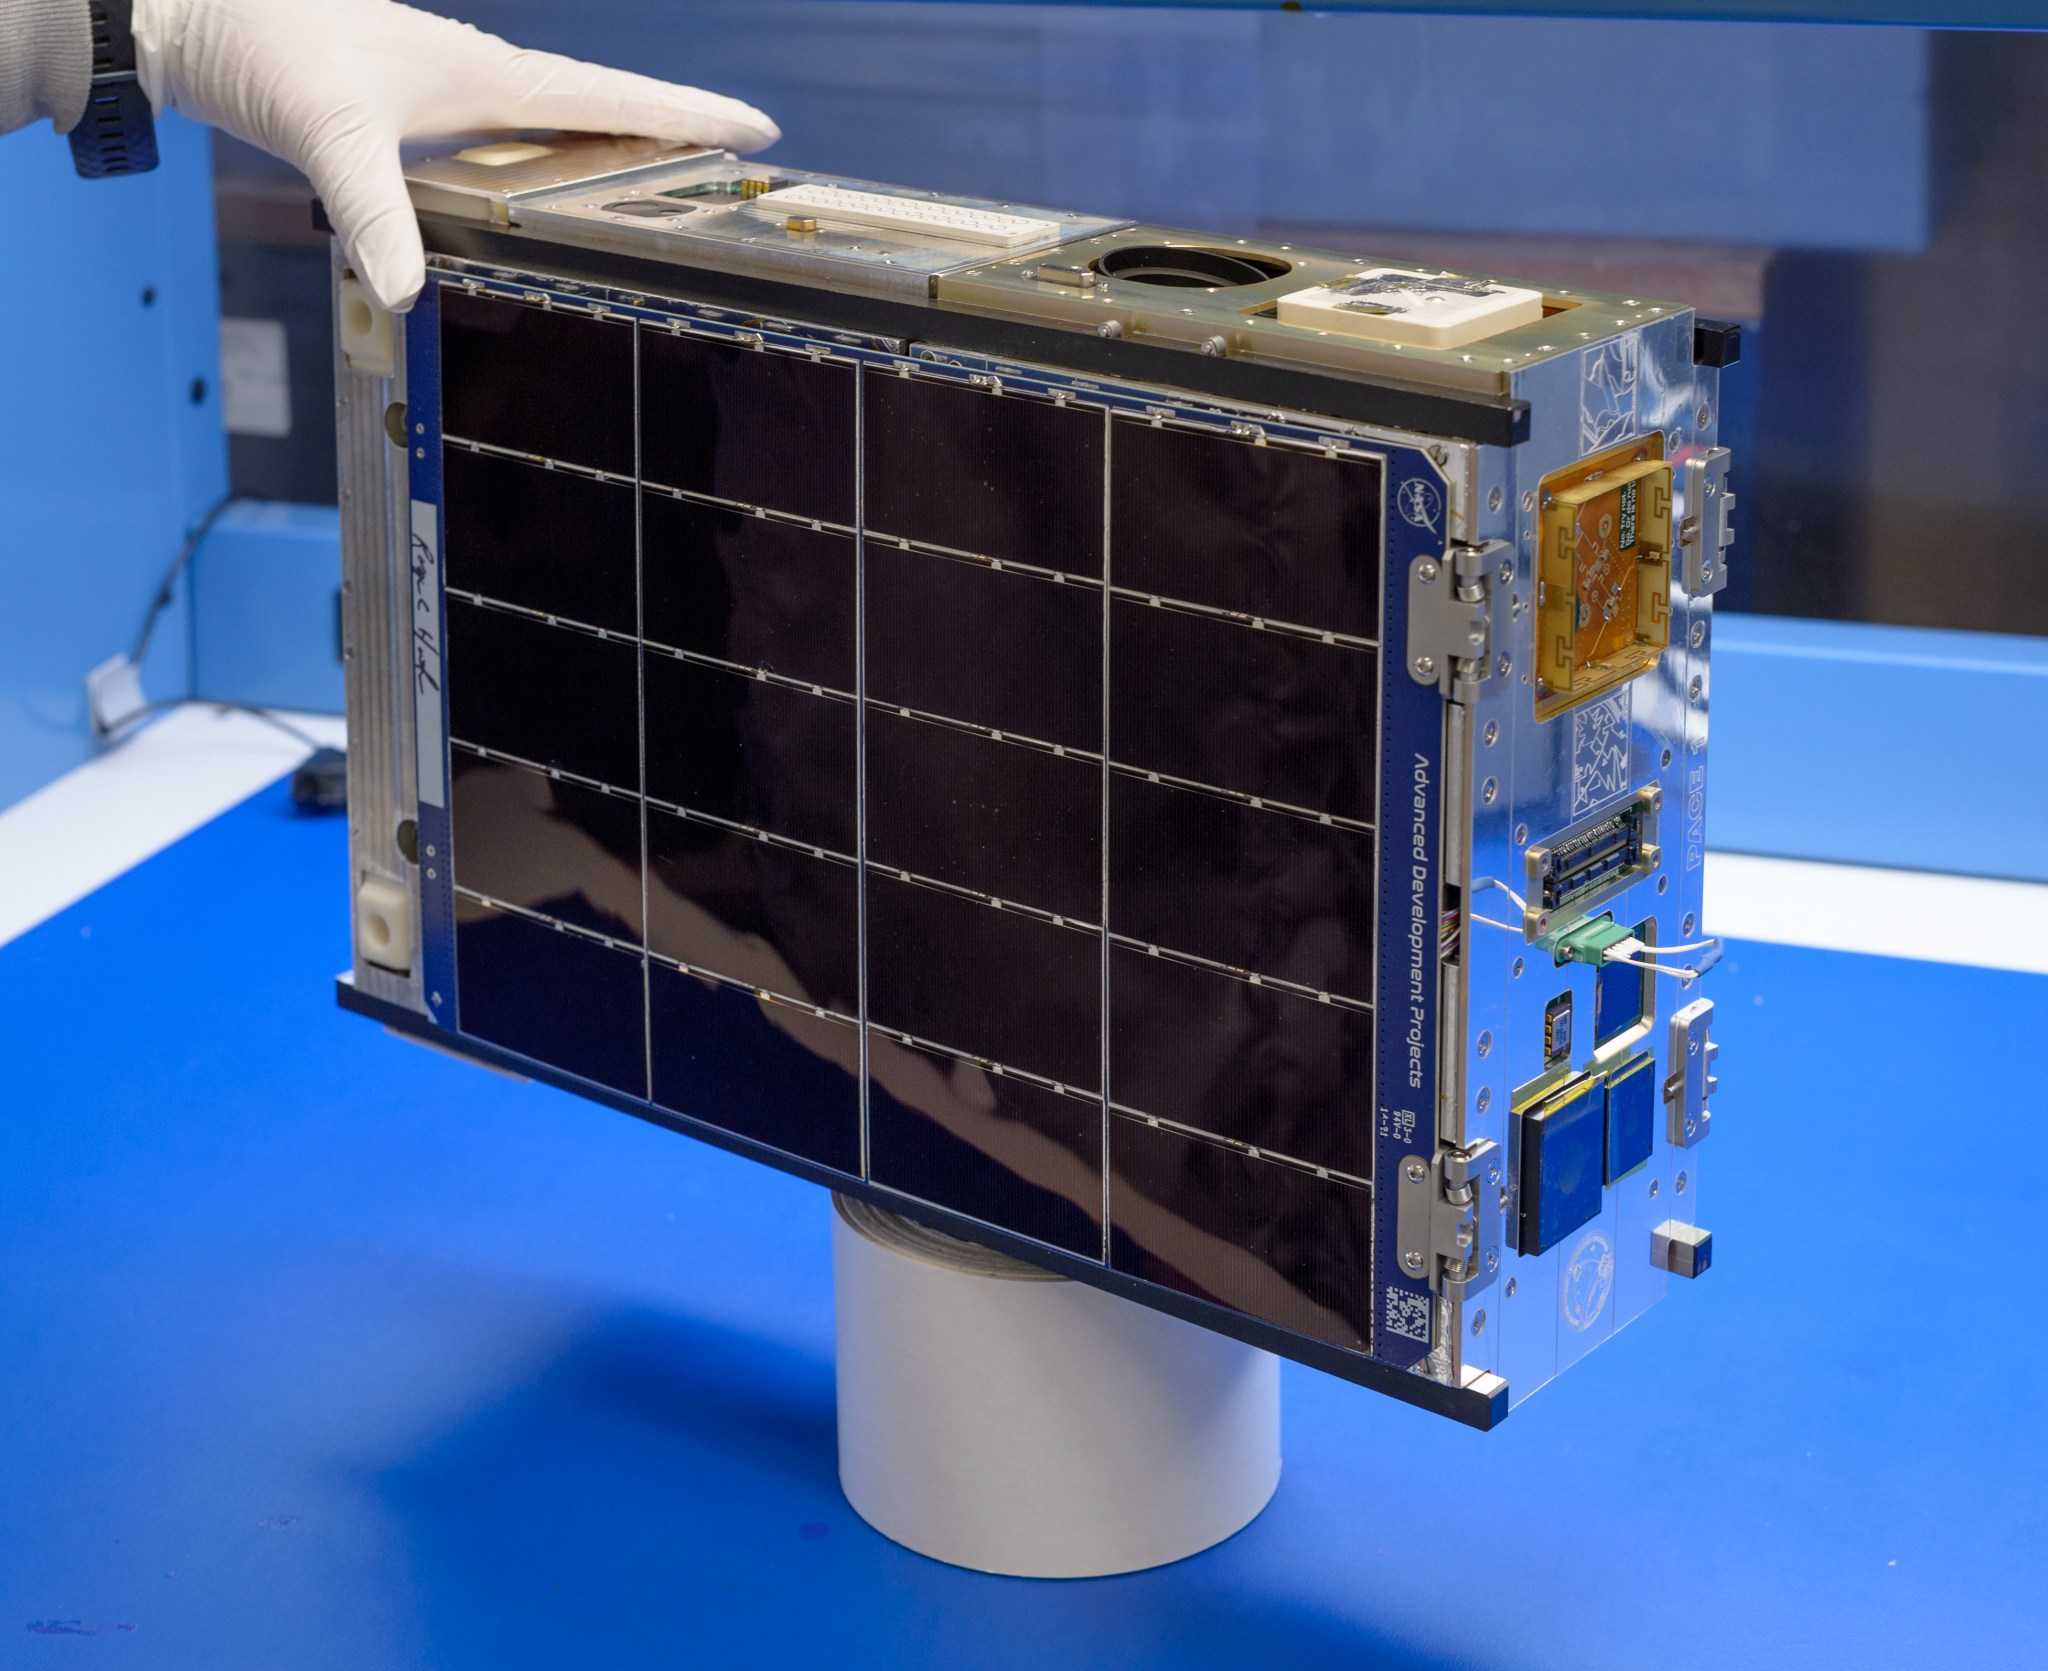 Overall view of the PACE-1 spacecraft, showing the solar panels stowed.